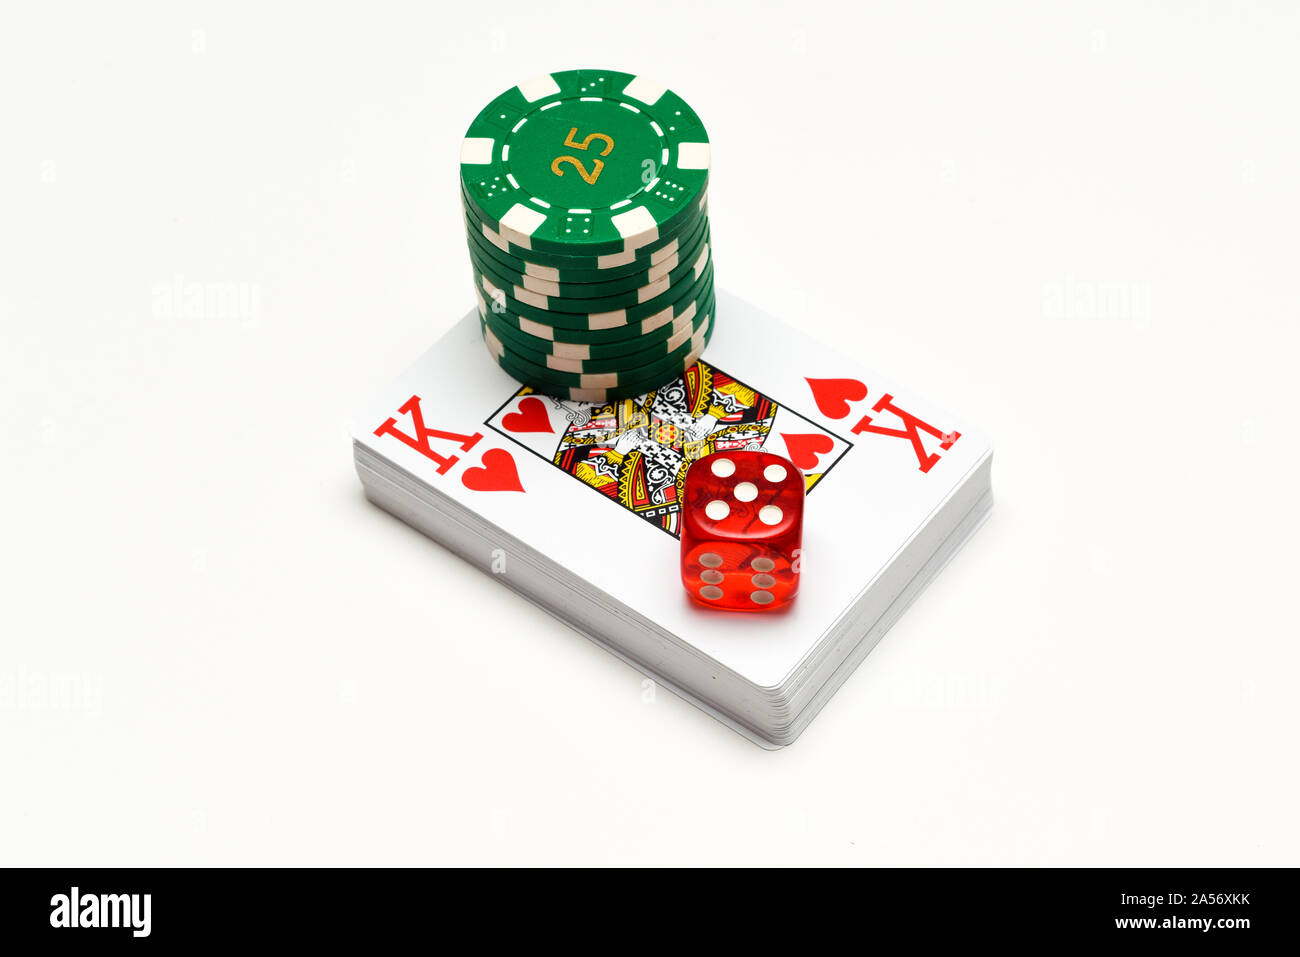 Casino objects playing cards dice casino chips isolated on white for playing chance and gambling games Stock Photo